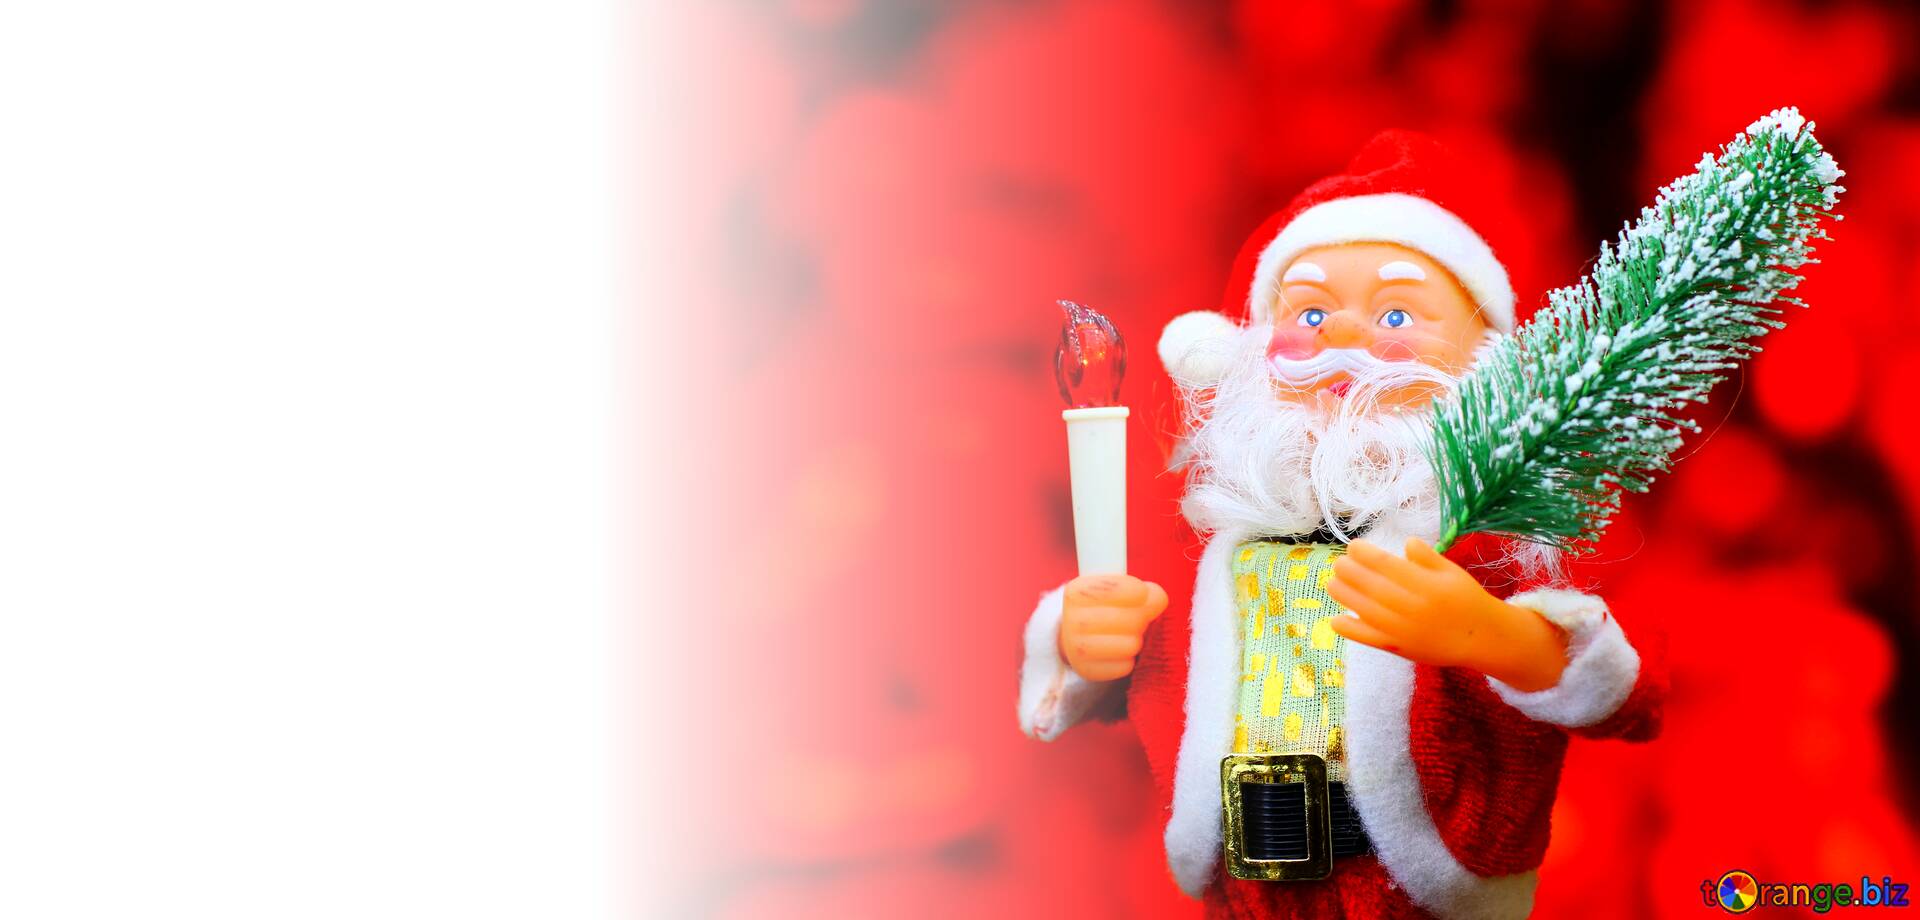 Download free picture Santa Claus christmas poster left side white on CC-BY  License ~ Free Image Stock  ~ fx №95001